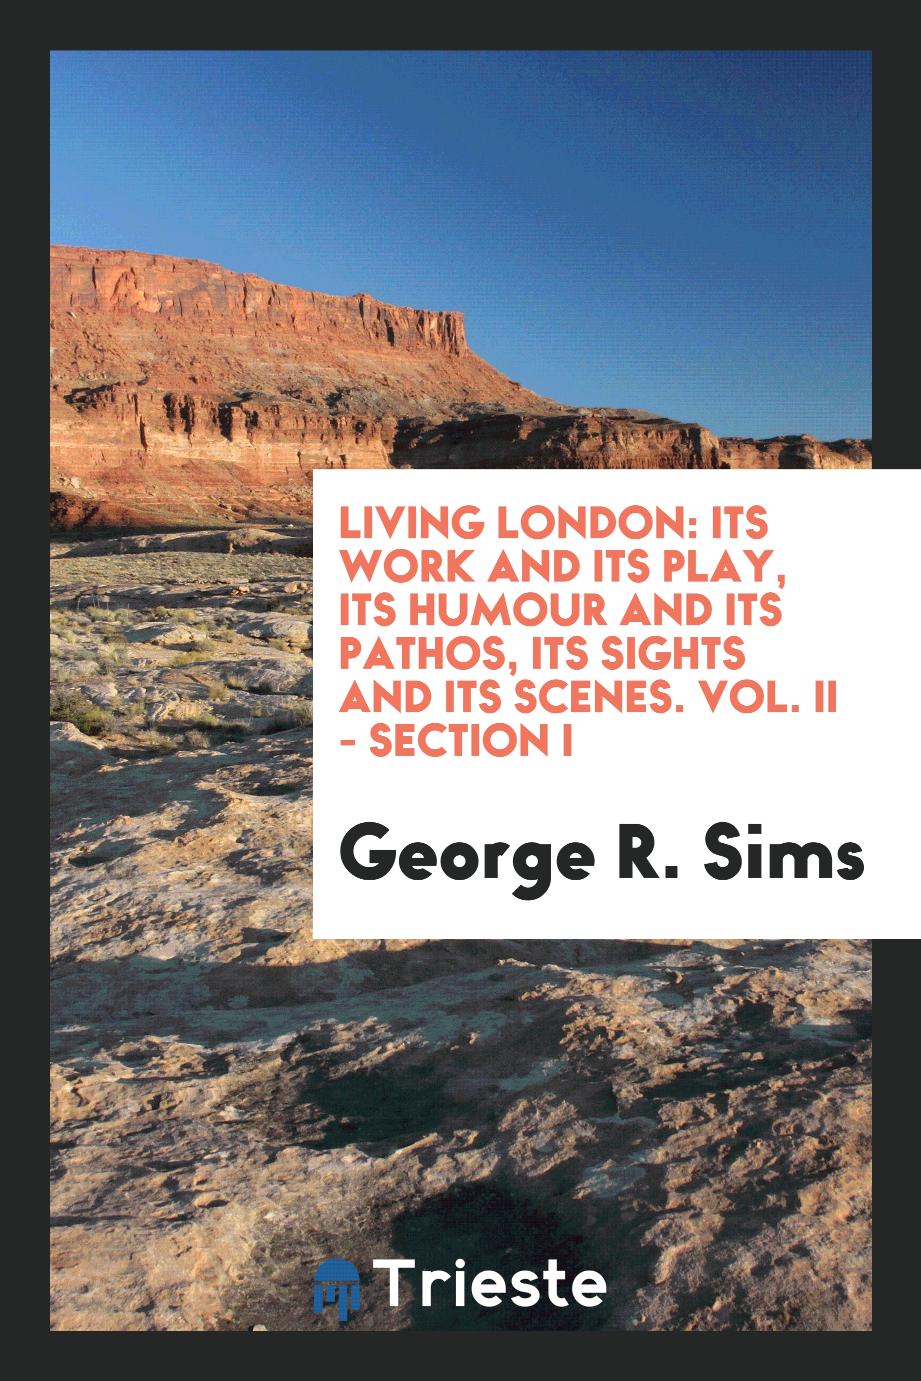 Living London: its work and its play, its humour and its pathos, its sights and its scenes. Vol. II - Section I